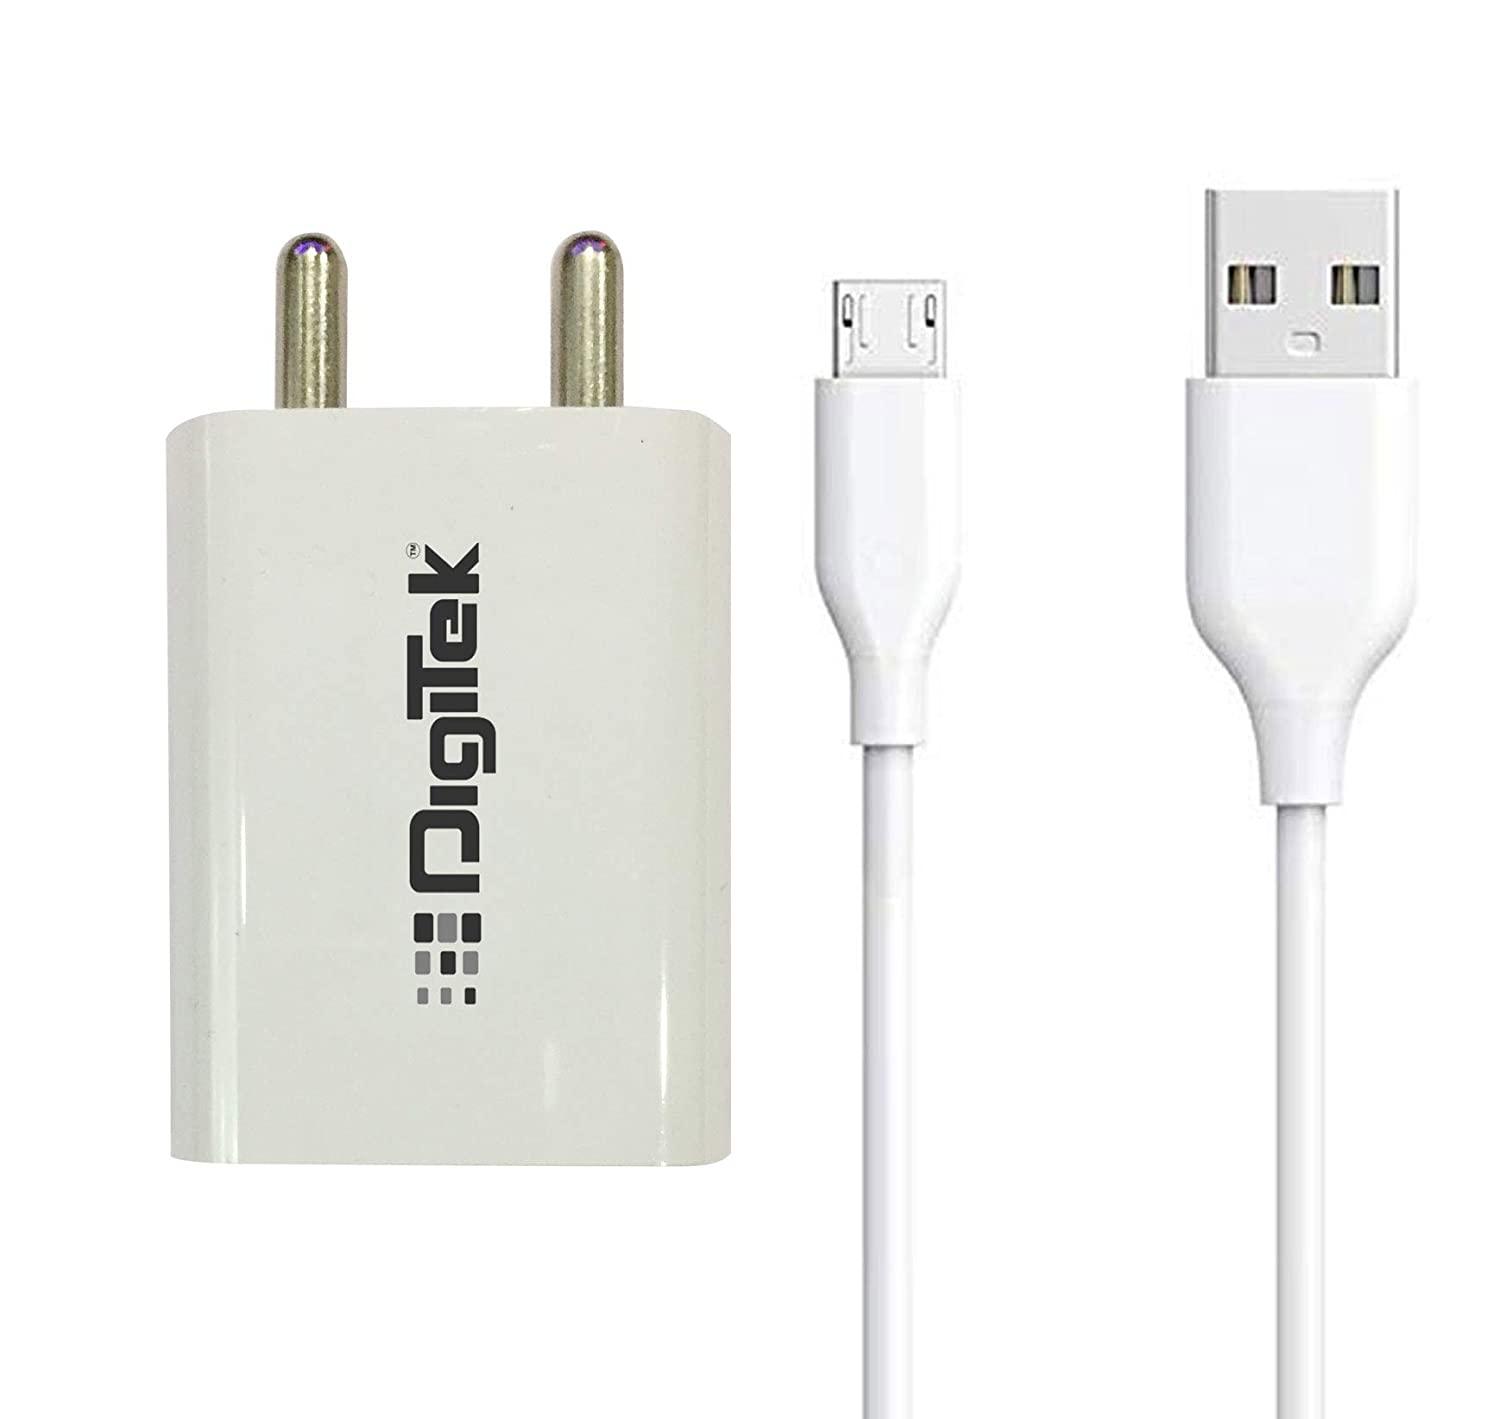 Digitek smart fast charger 2.4a dual usb adapter for smartphone (with micro usb data cable 2.4a) DMC-026 MU- White - Digitek